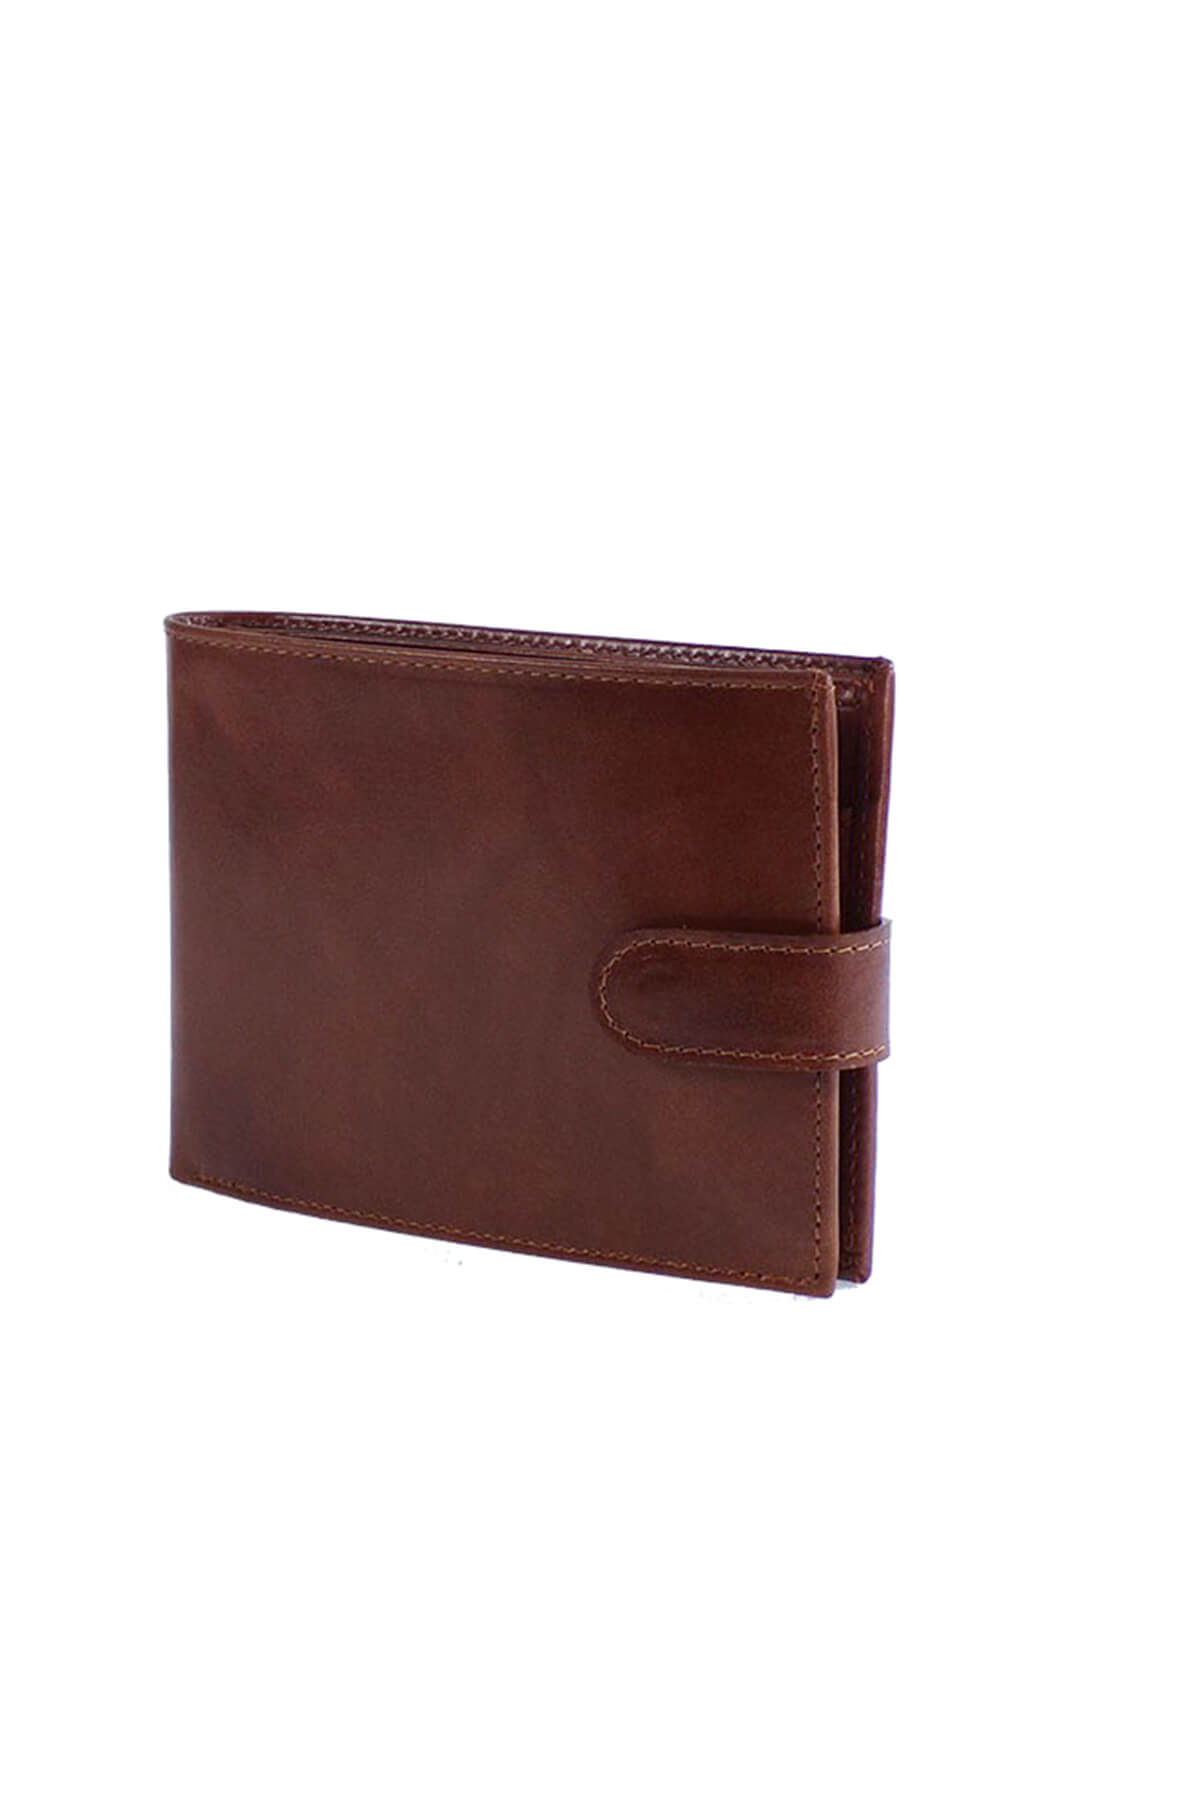 Bor Leather Wallet With Clip